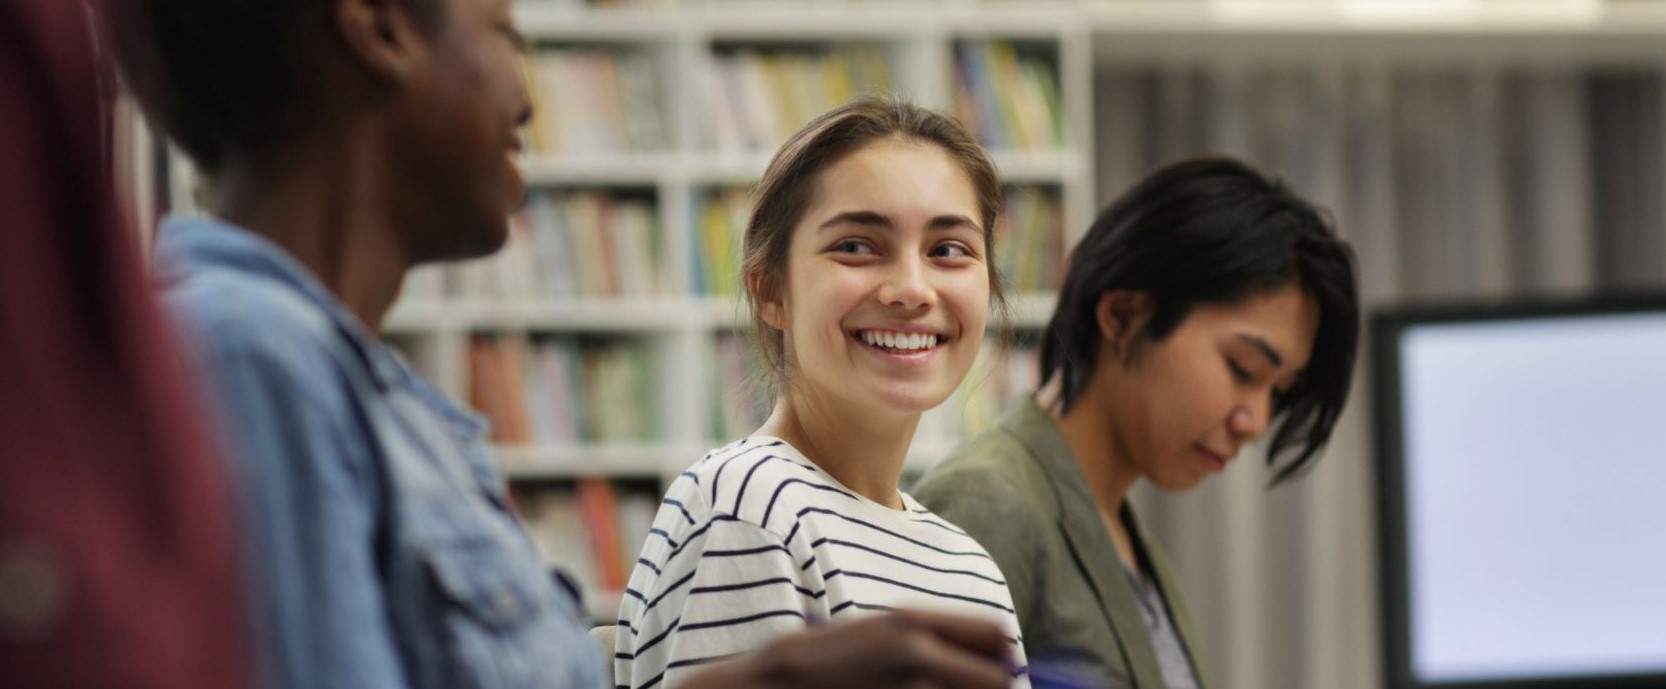 Group of three young women talking and smiling in library